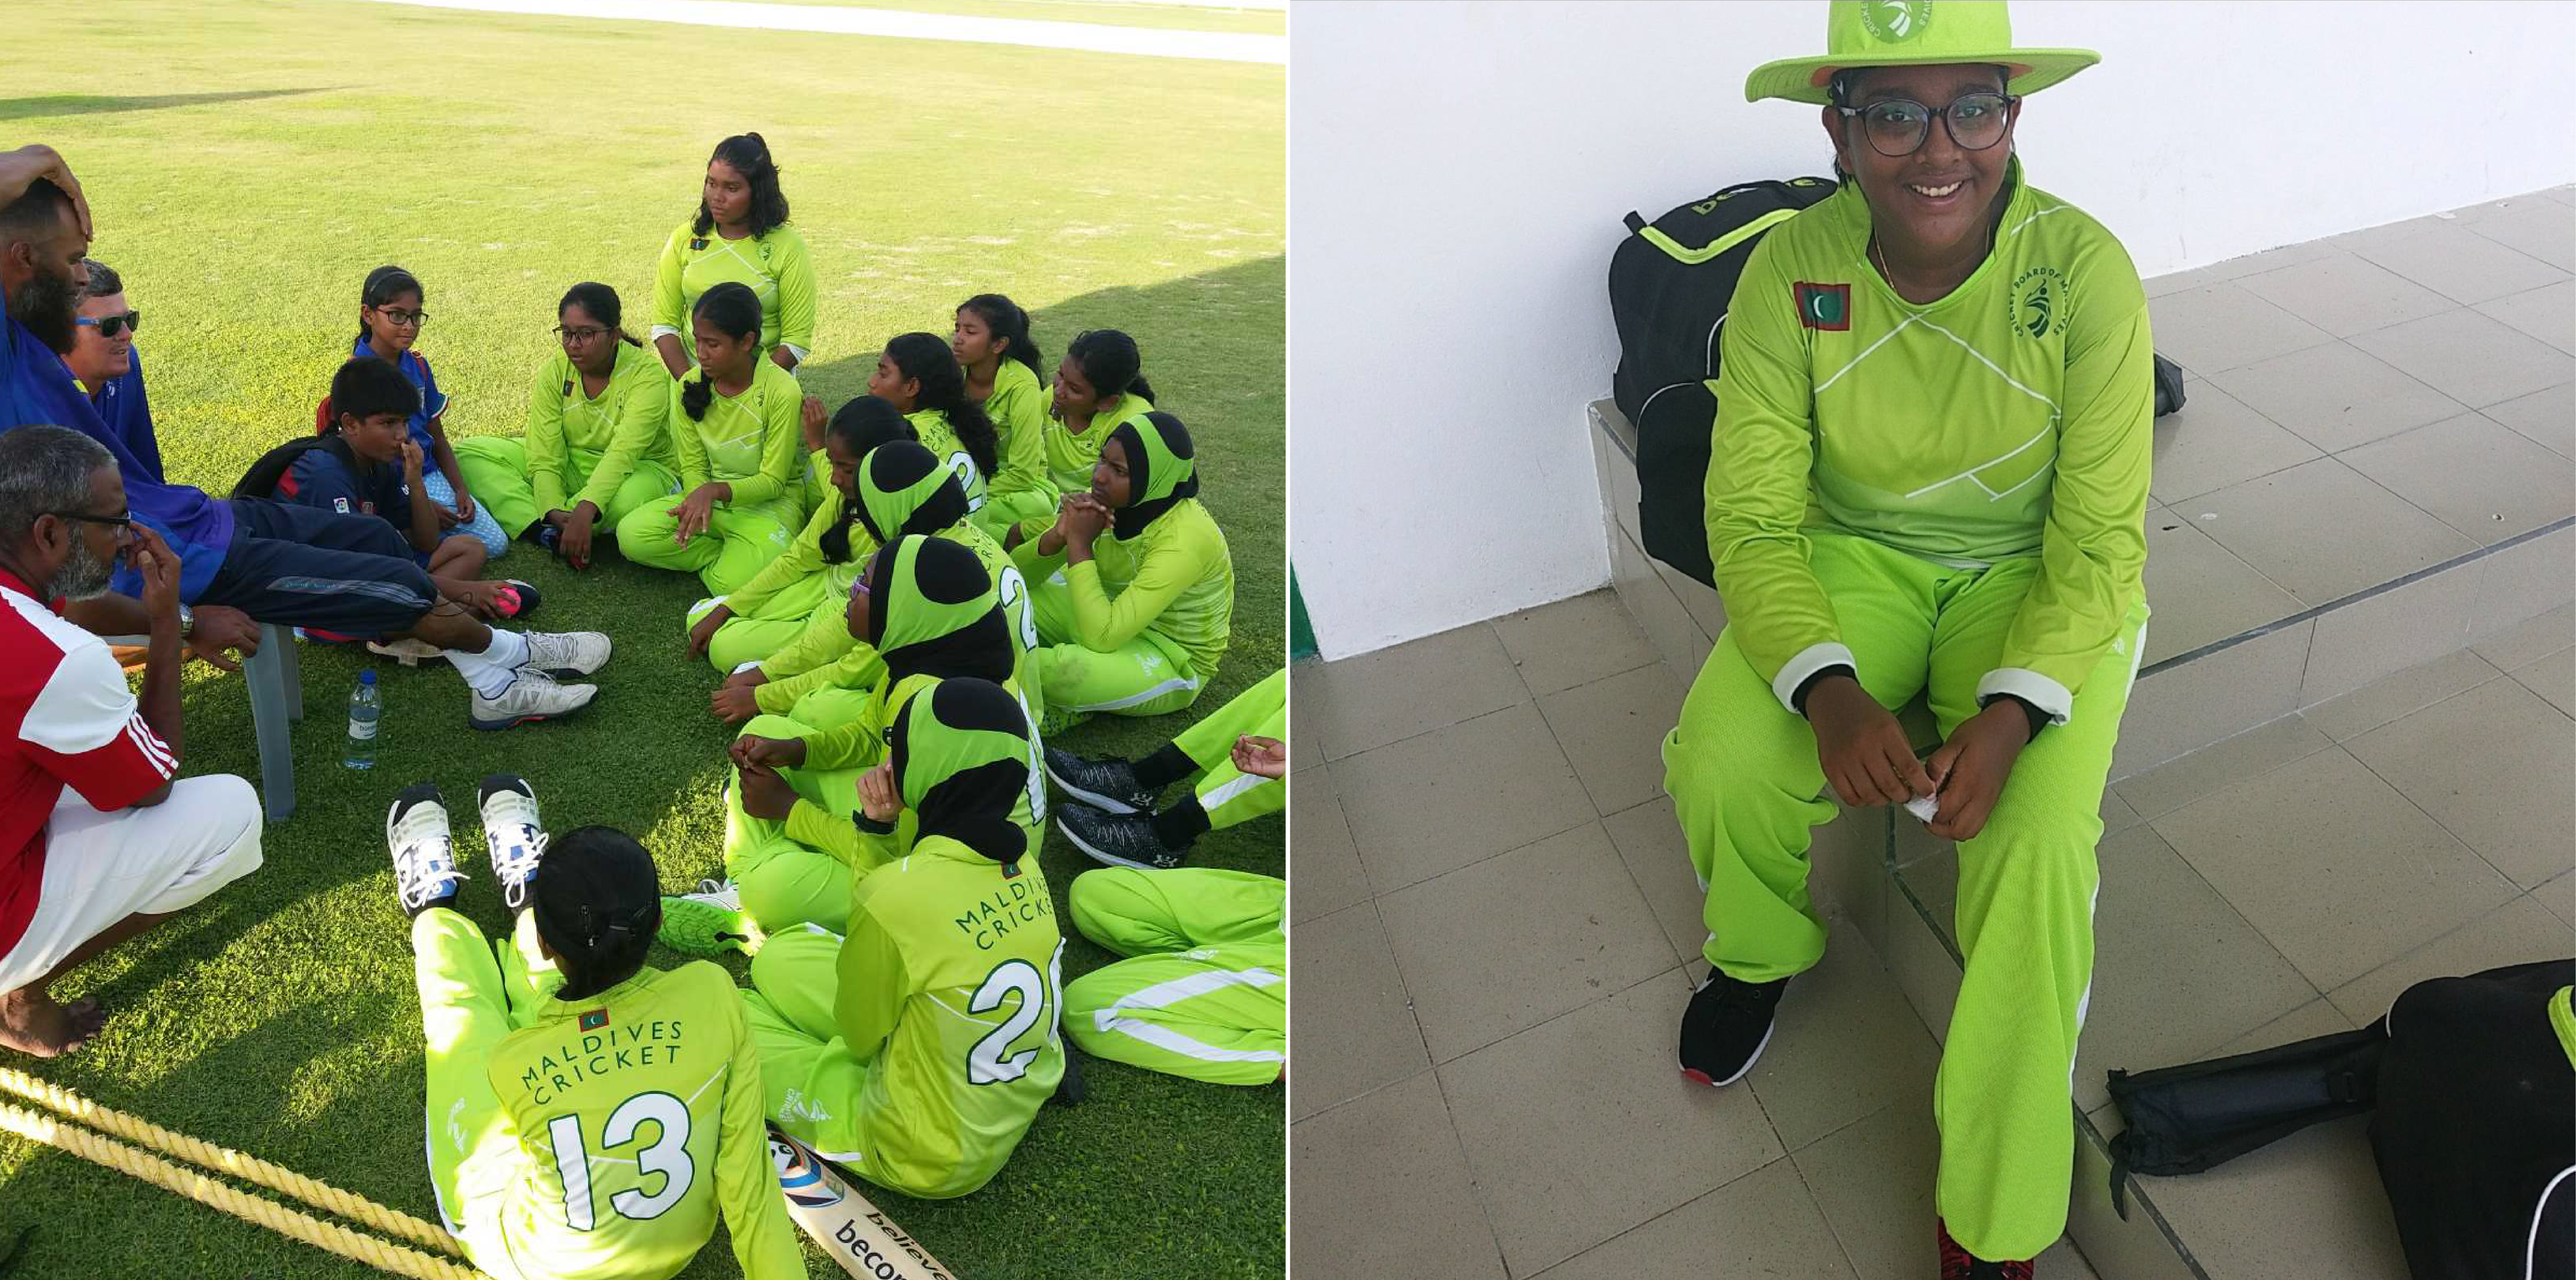 On the left: Team debrief - a circle of learning as Leen and her teammates share post-match reflections. On the right: A cheerful Leen during the early days of her cricketing journey. © Leen